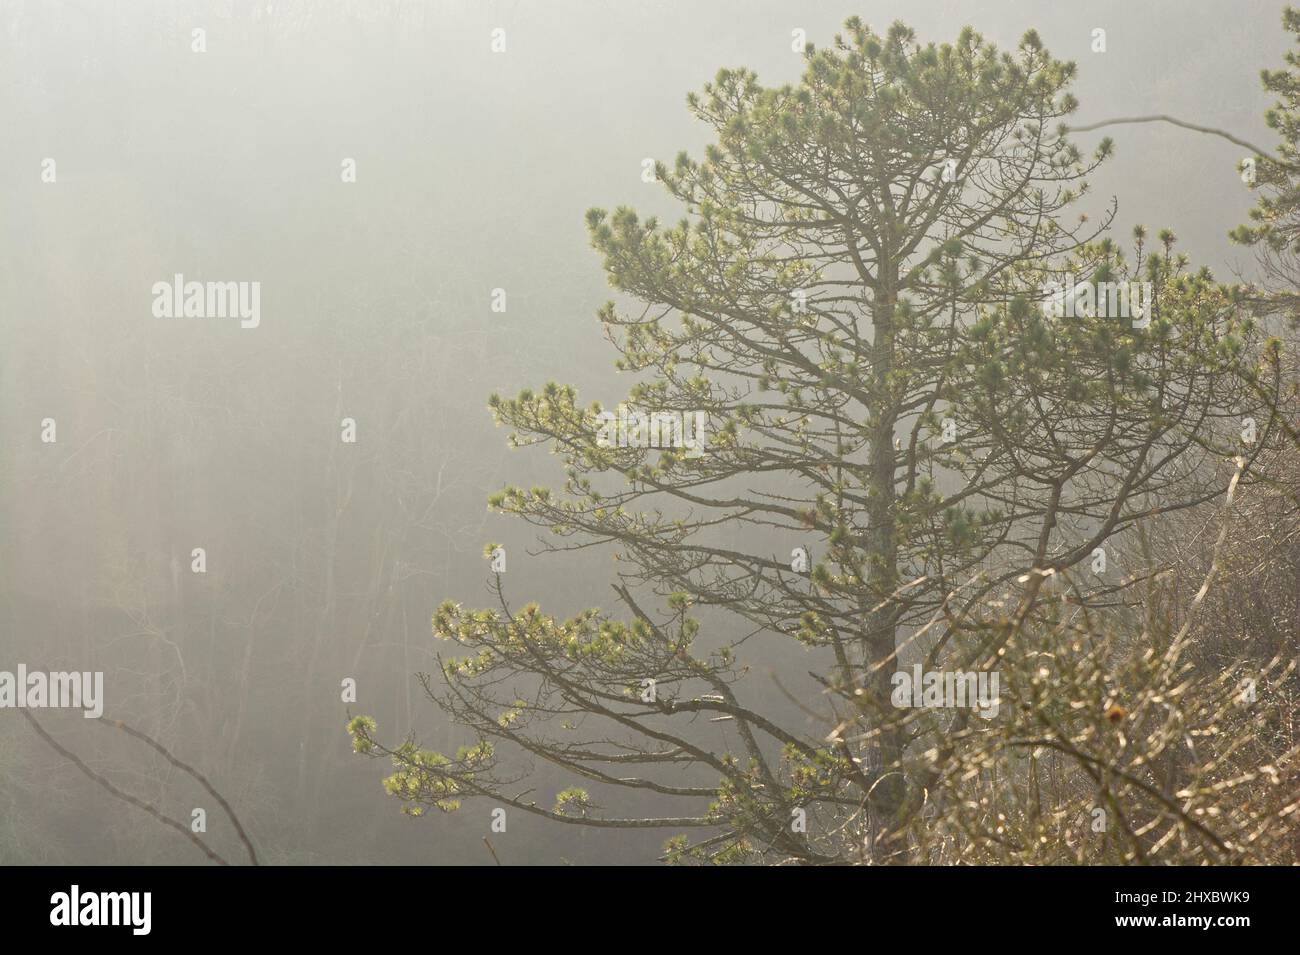 Pine tree on hillside with misty background. Stock Photo